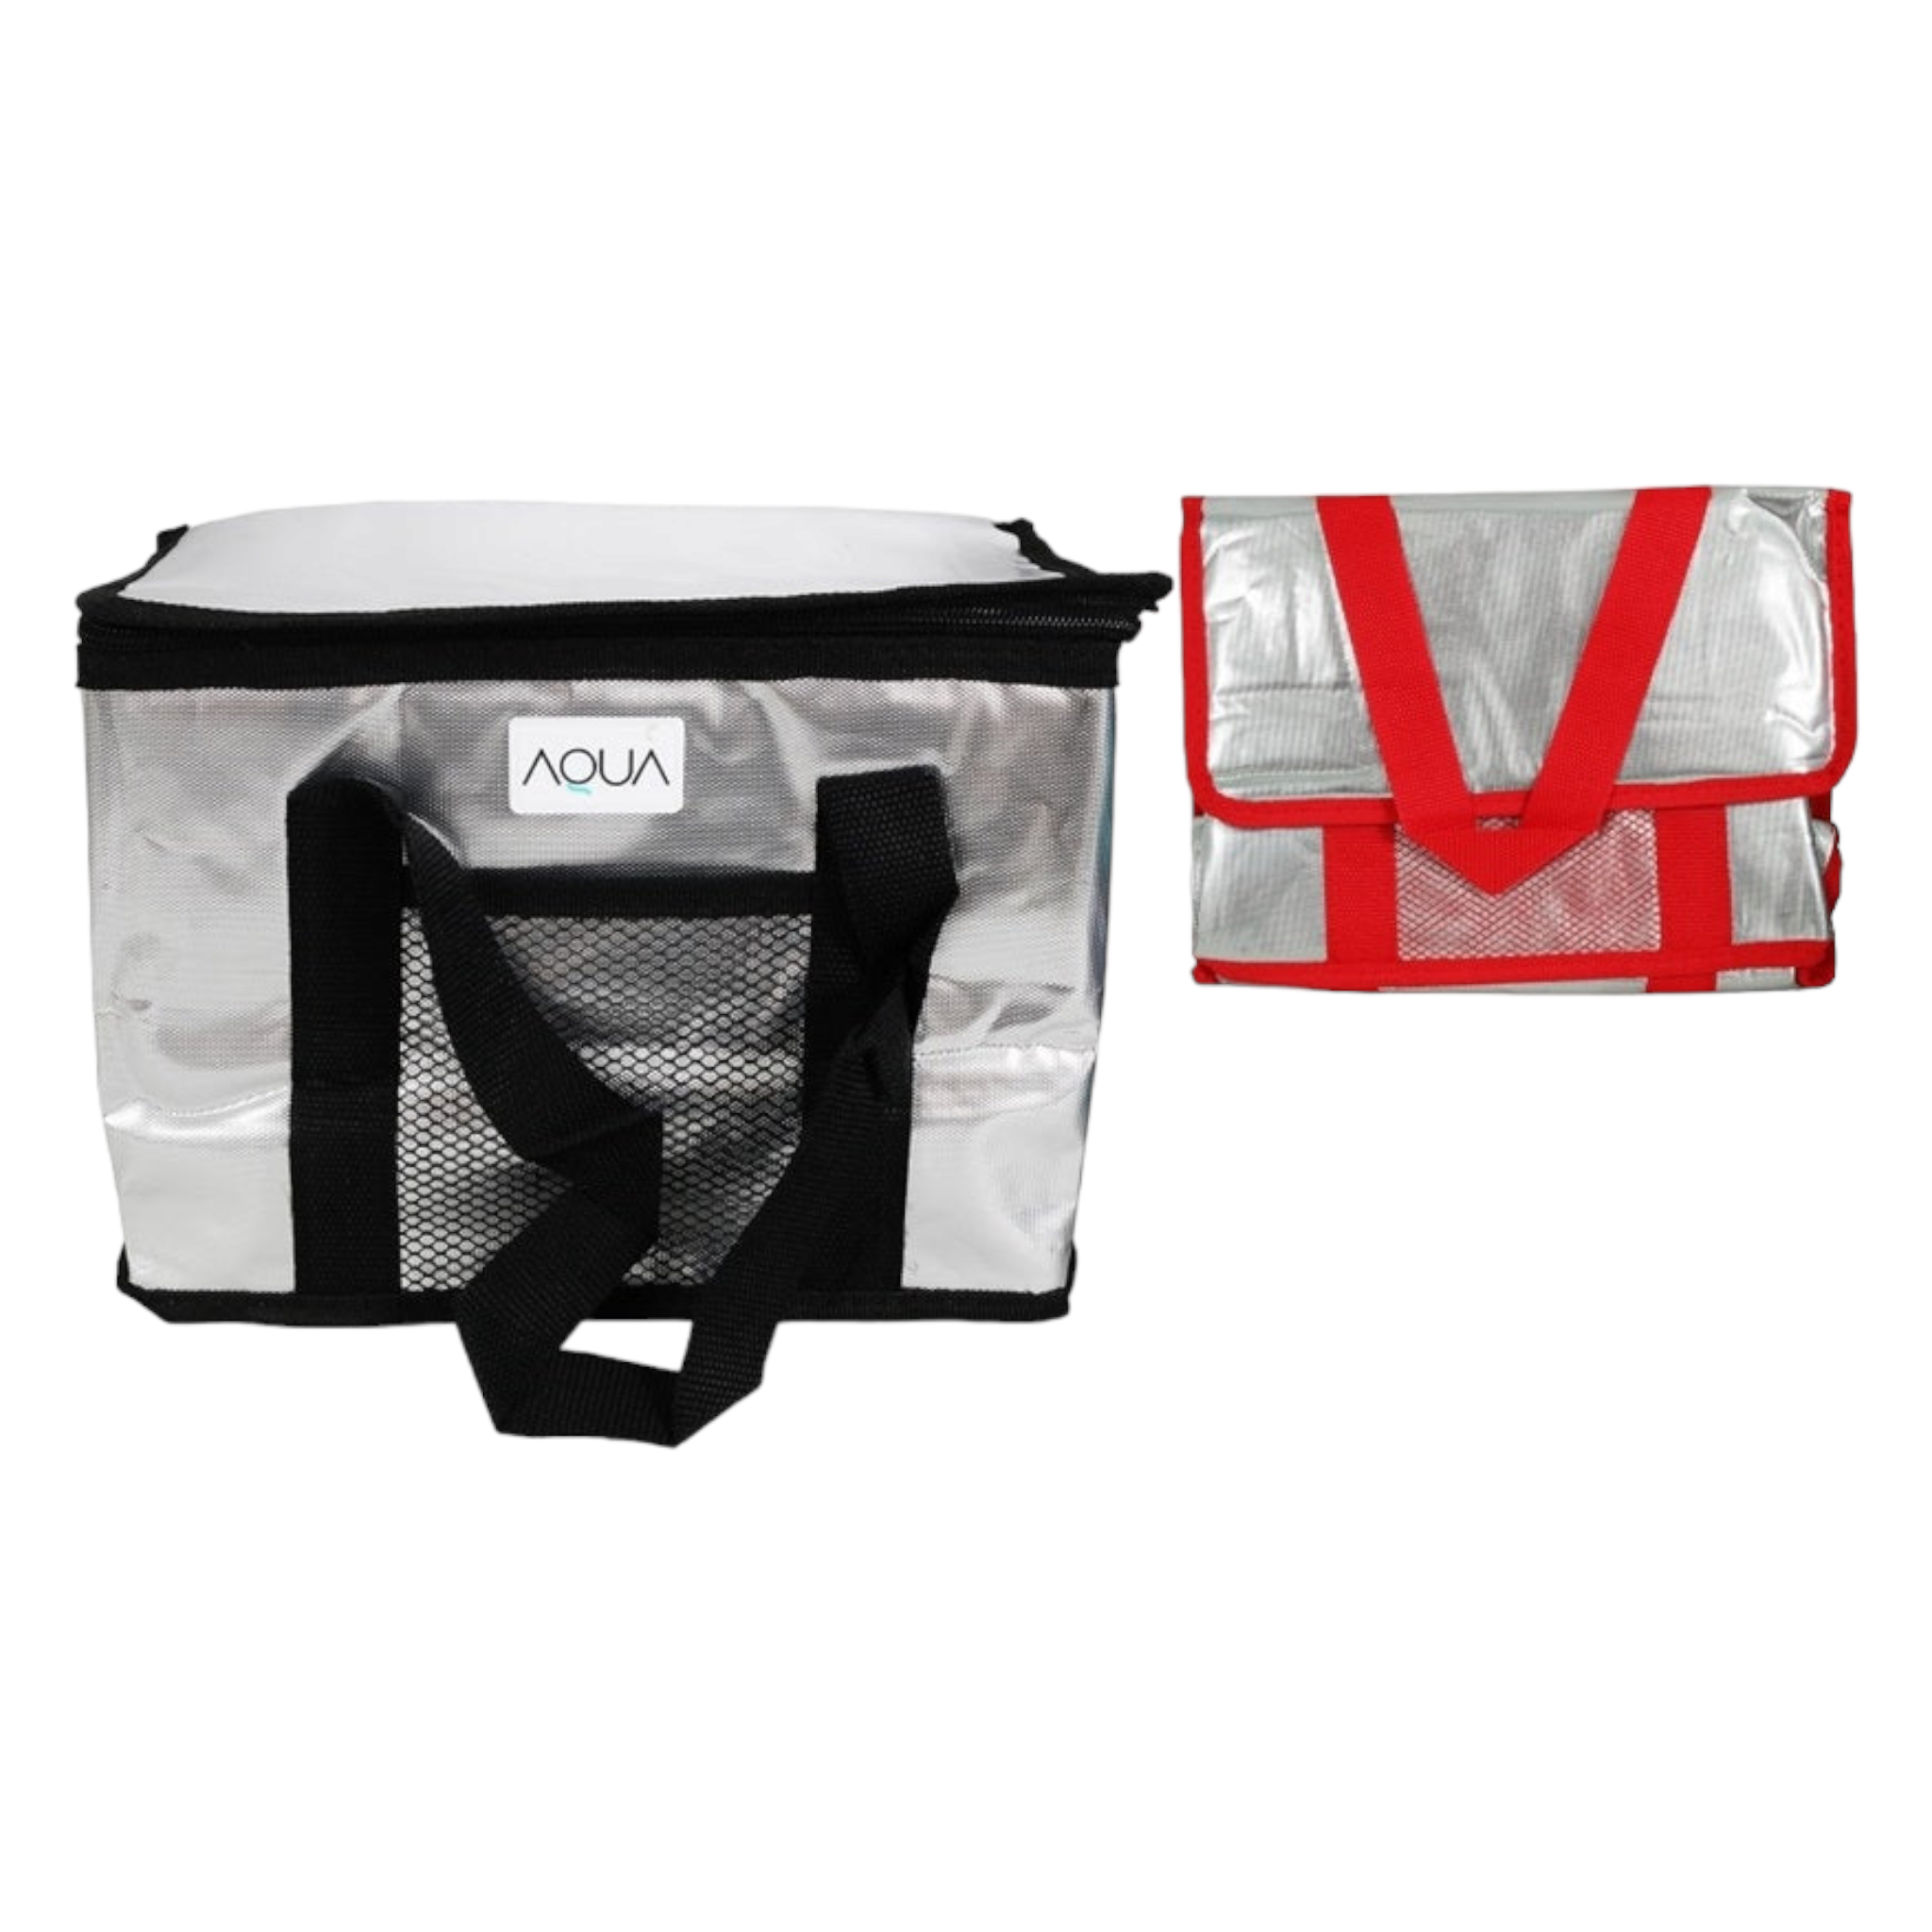 Aqua 8L Insulated Thermal Cooler Lunch Bag 34508